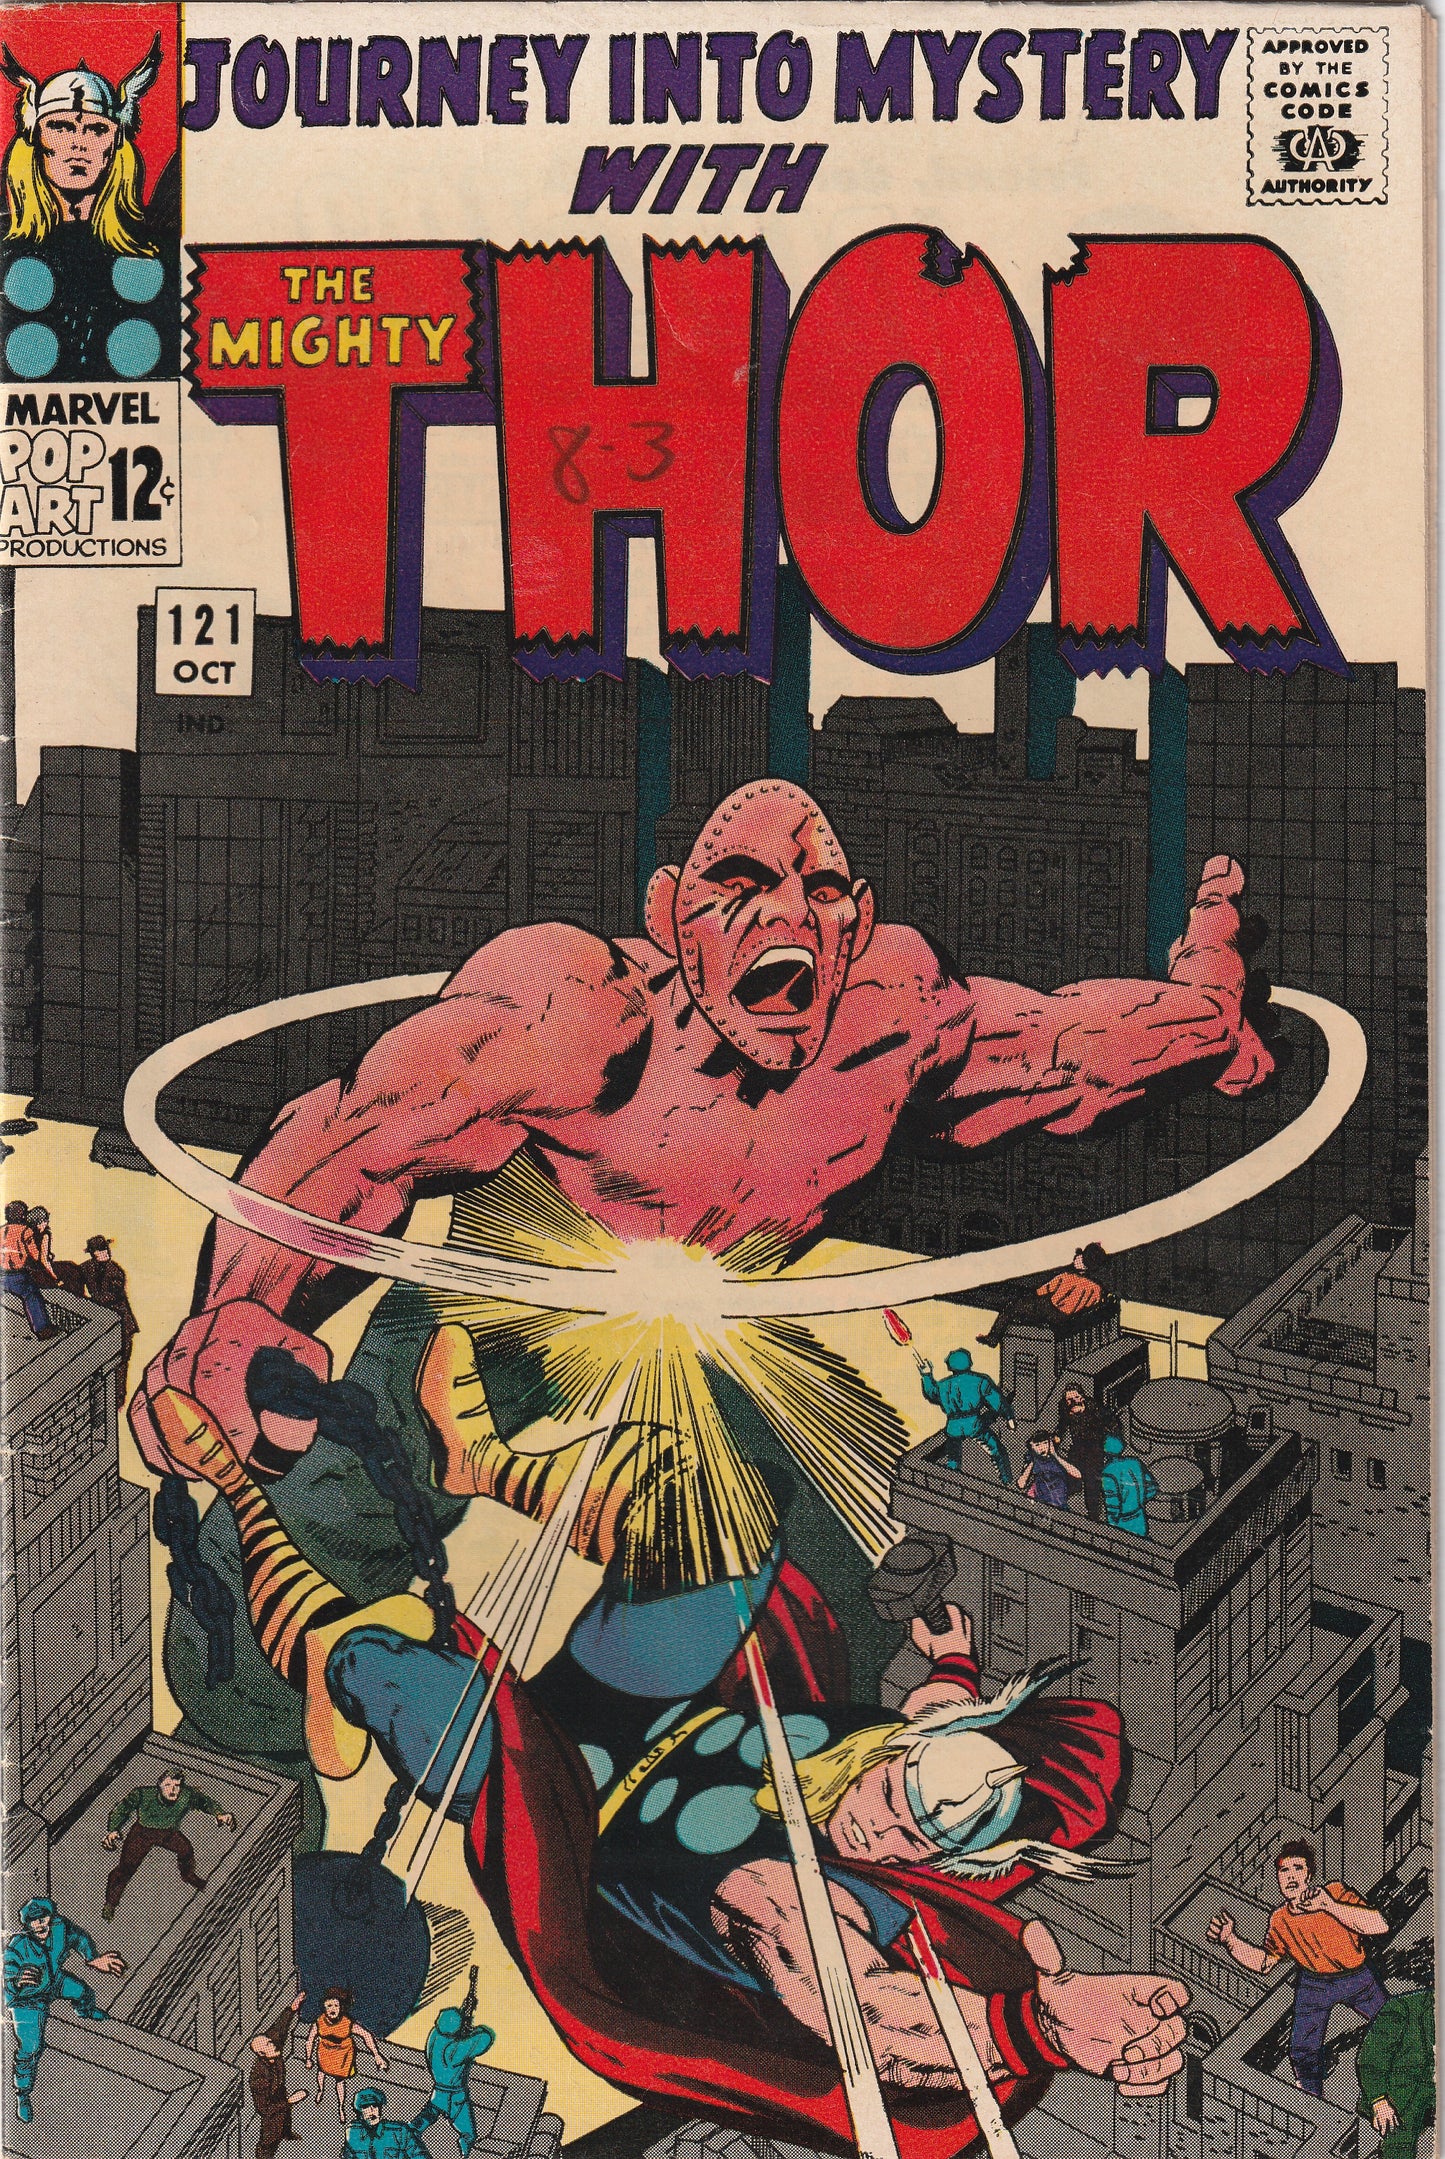 Journey Into Mystery #121 (1965) - With Thor